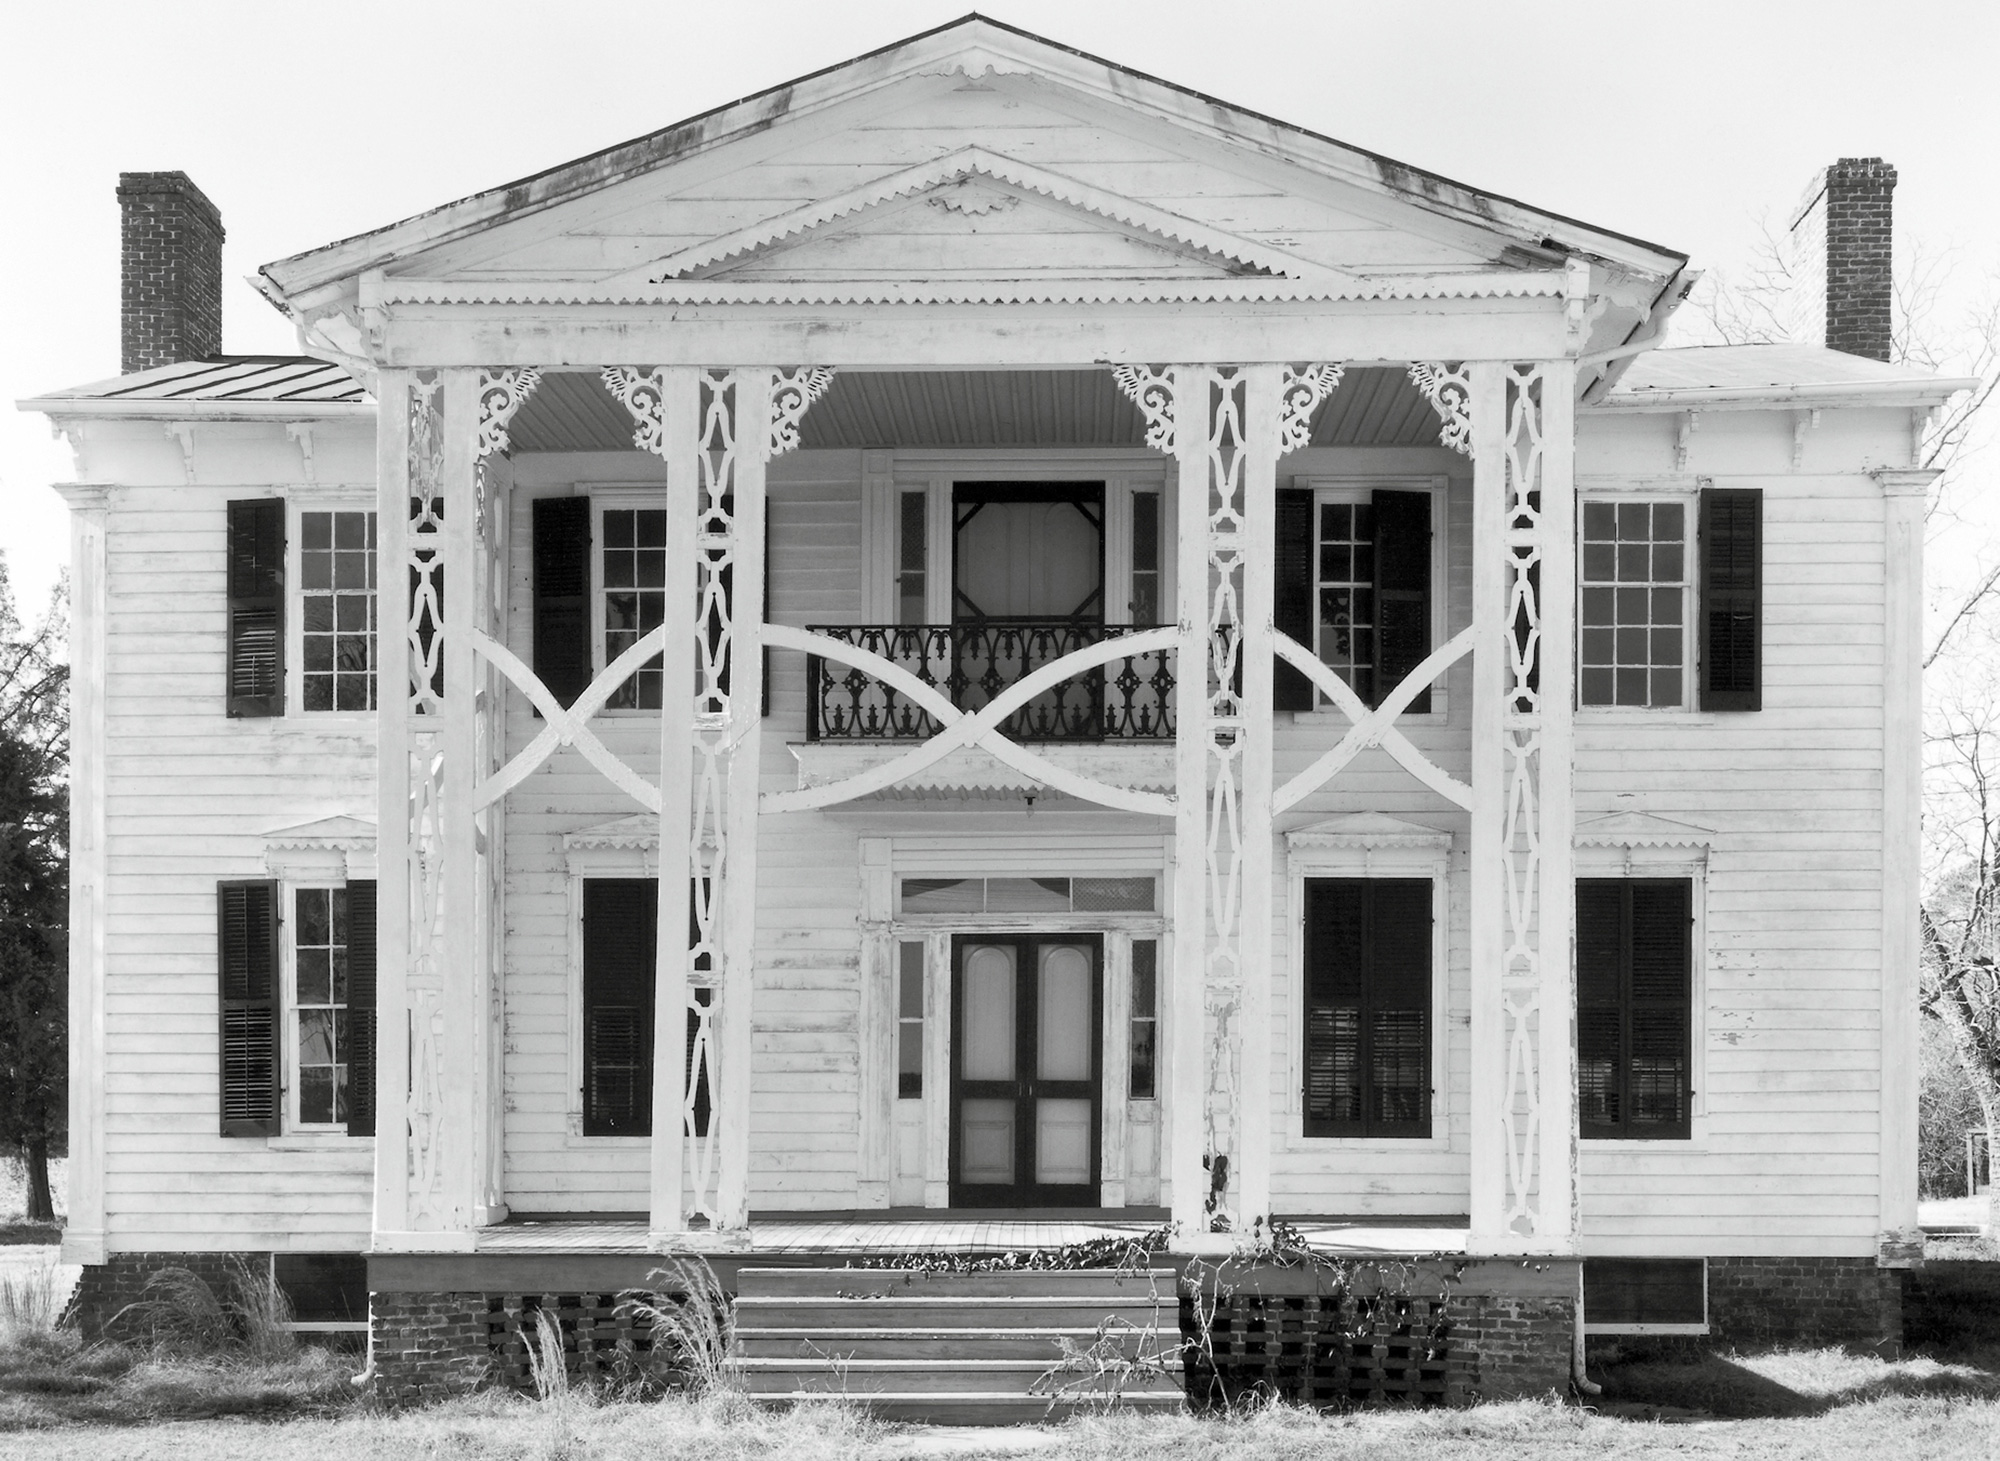 Max Belcher’s nineteen eighty-six photograph titled “House” of a dilapidated stately home built in circa eighteen twenty in Northampton County, North Carolina.